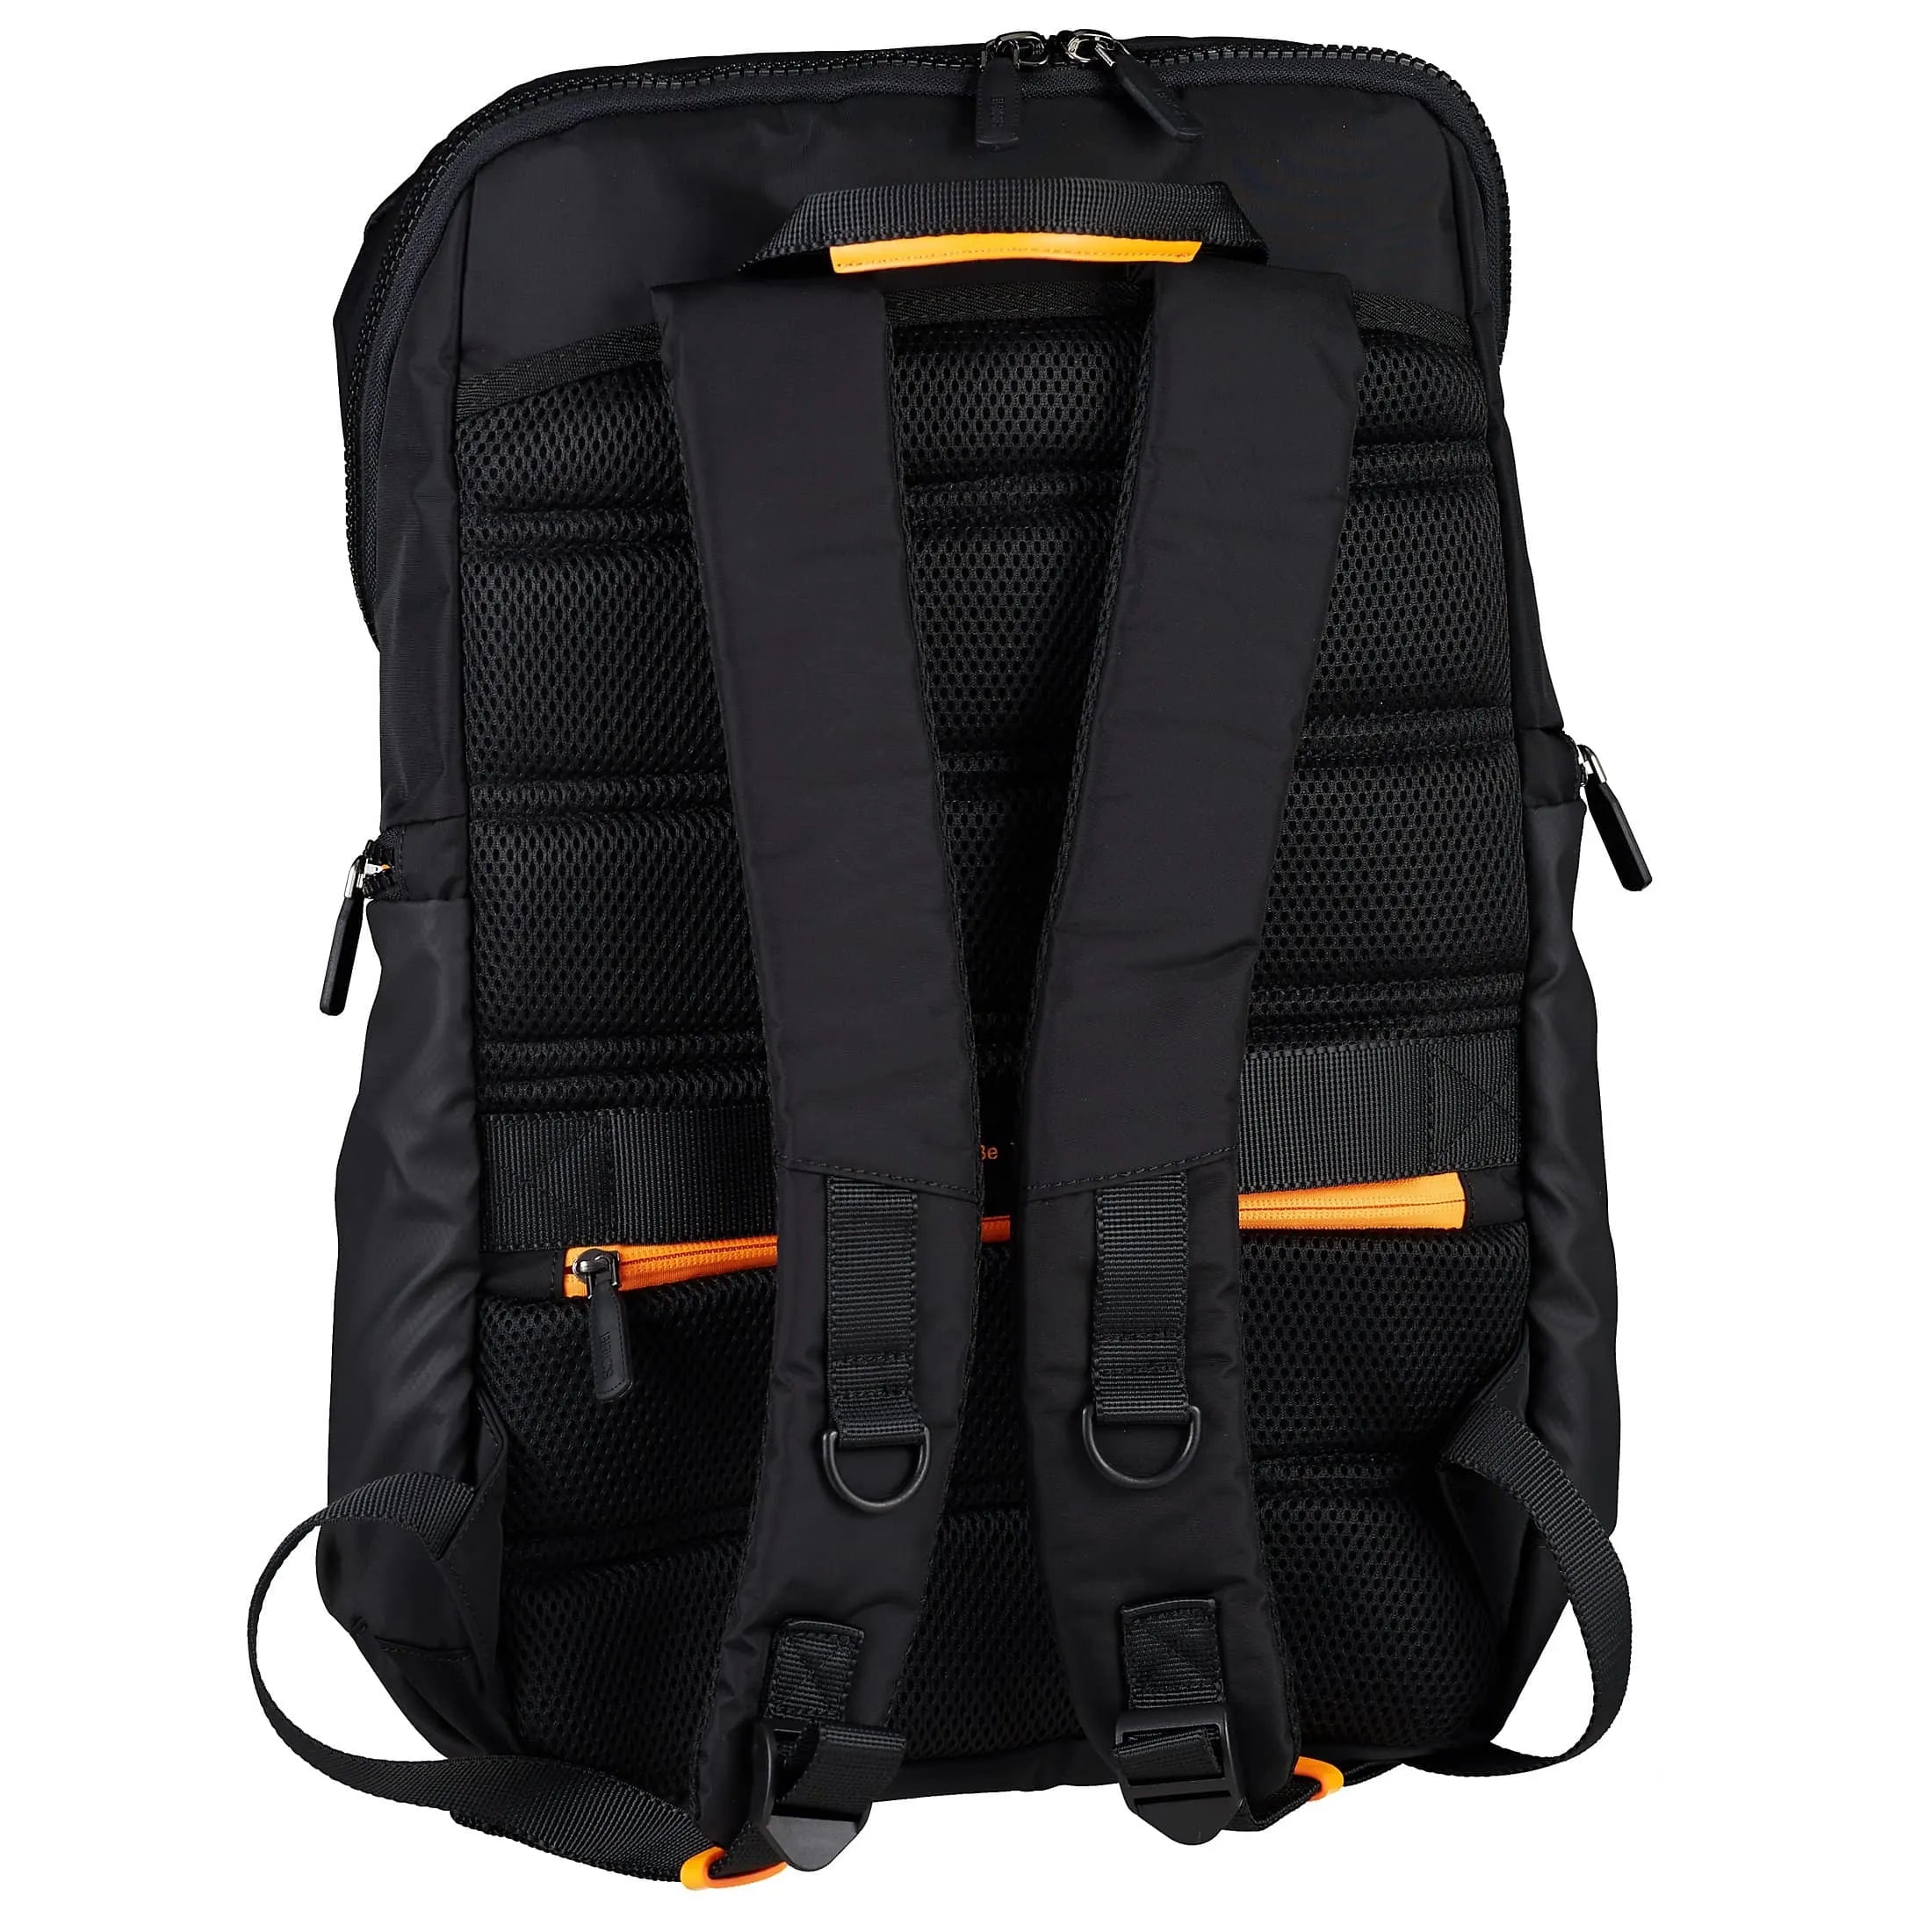 BY by Brics Eolo Business Rucksack 47 cm - black